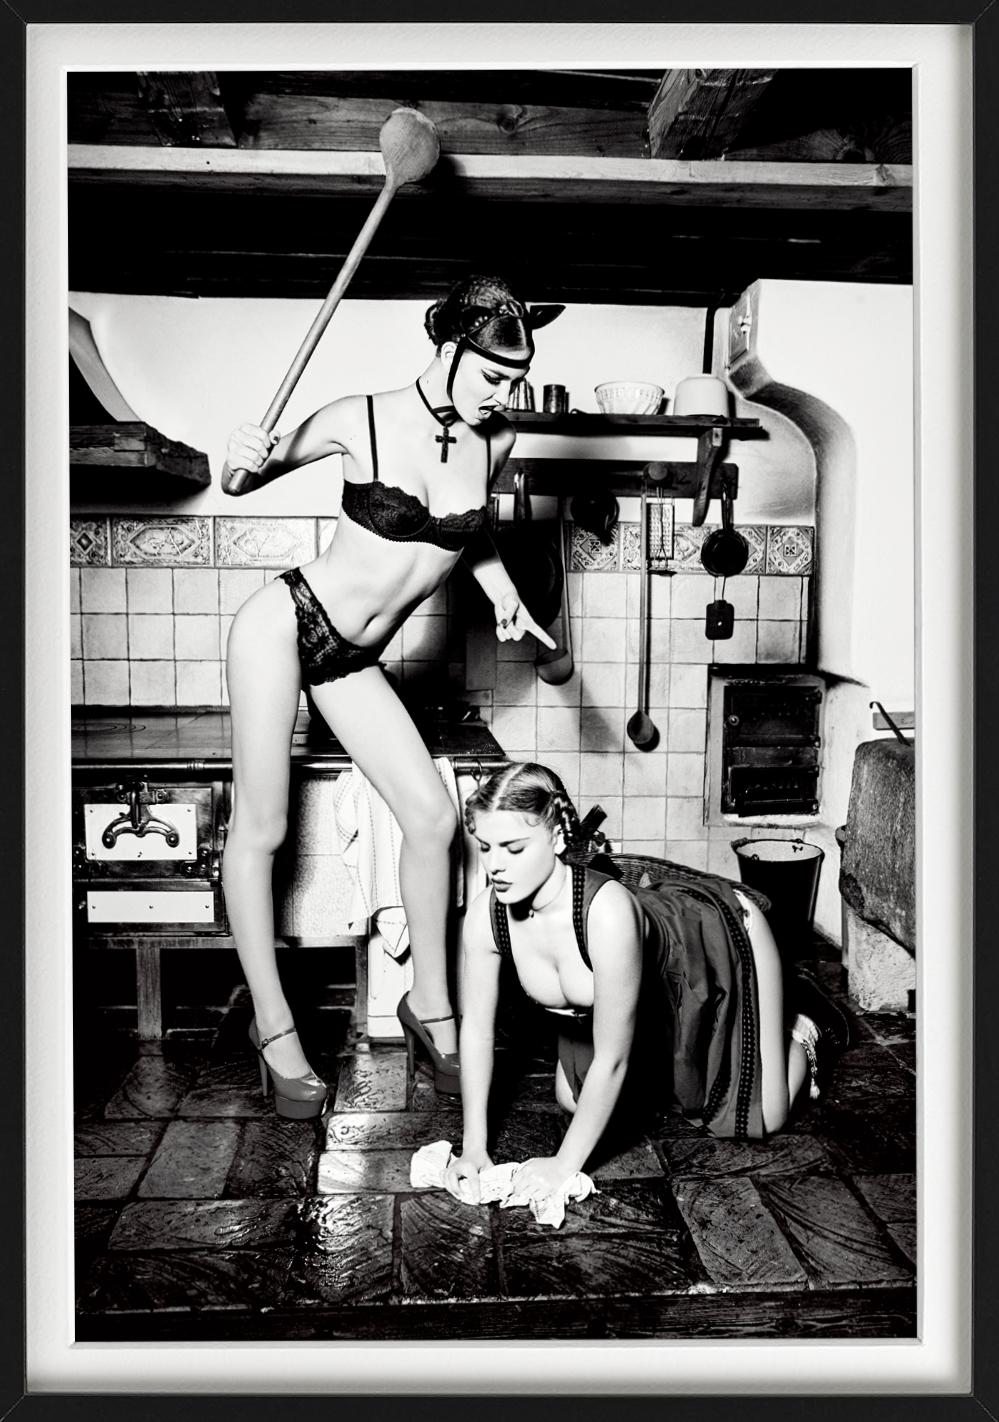 The Spill - Models in a kitchen cleaning the floor, fine art photography, 2015 - Photograph by Ellen von Unwerth